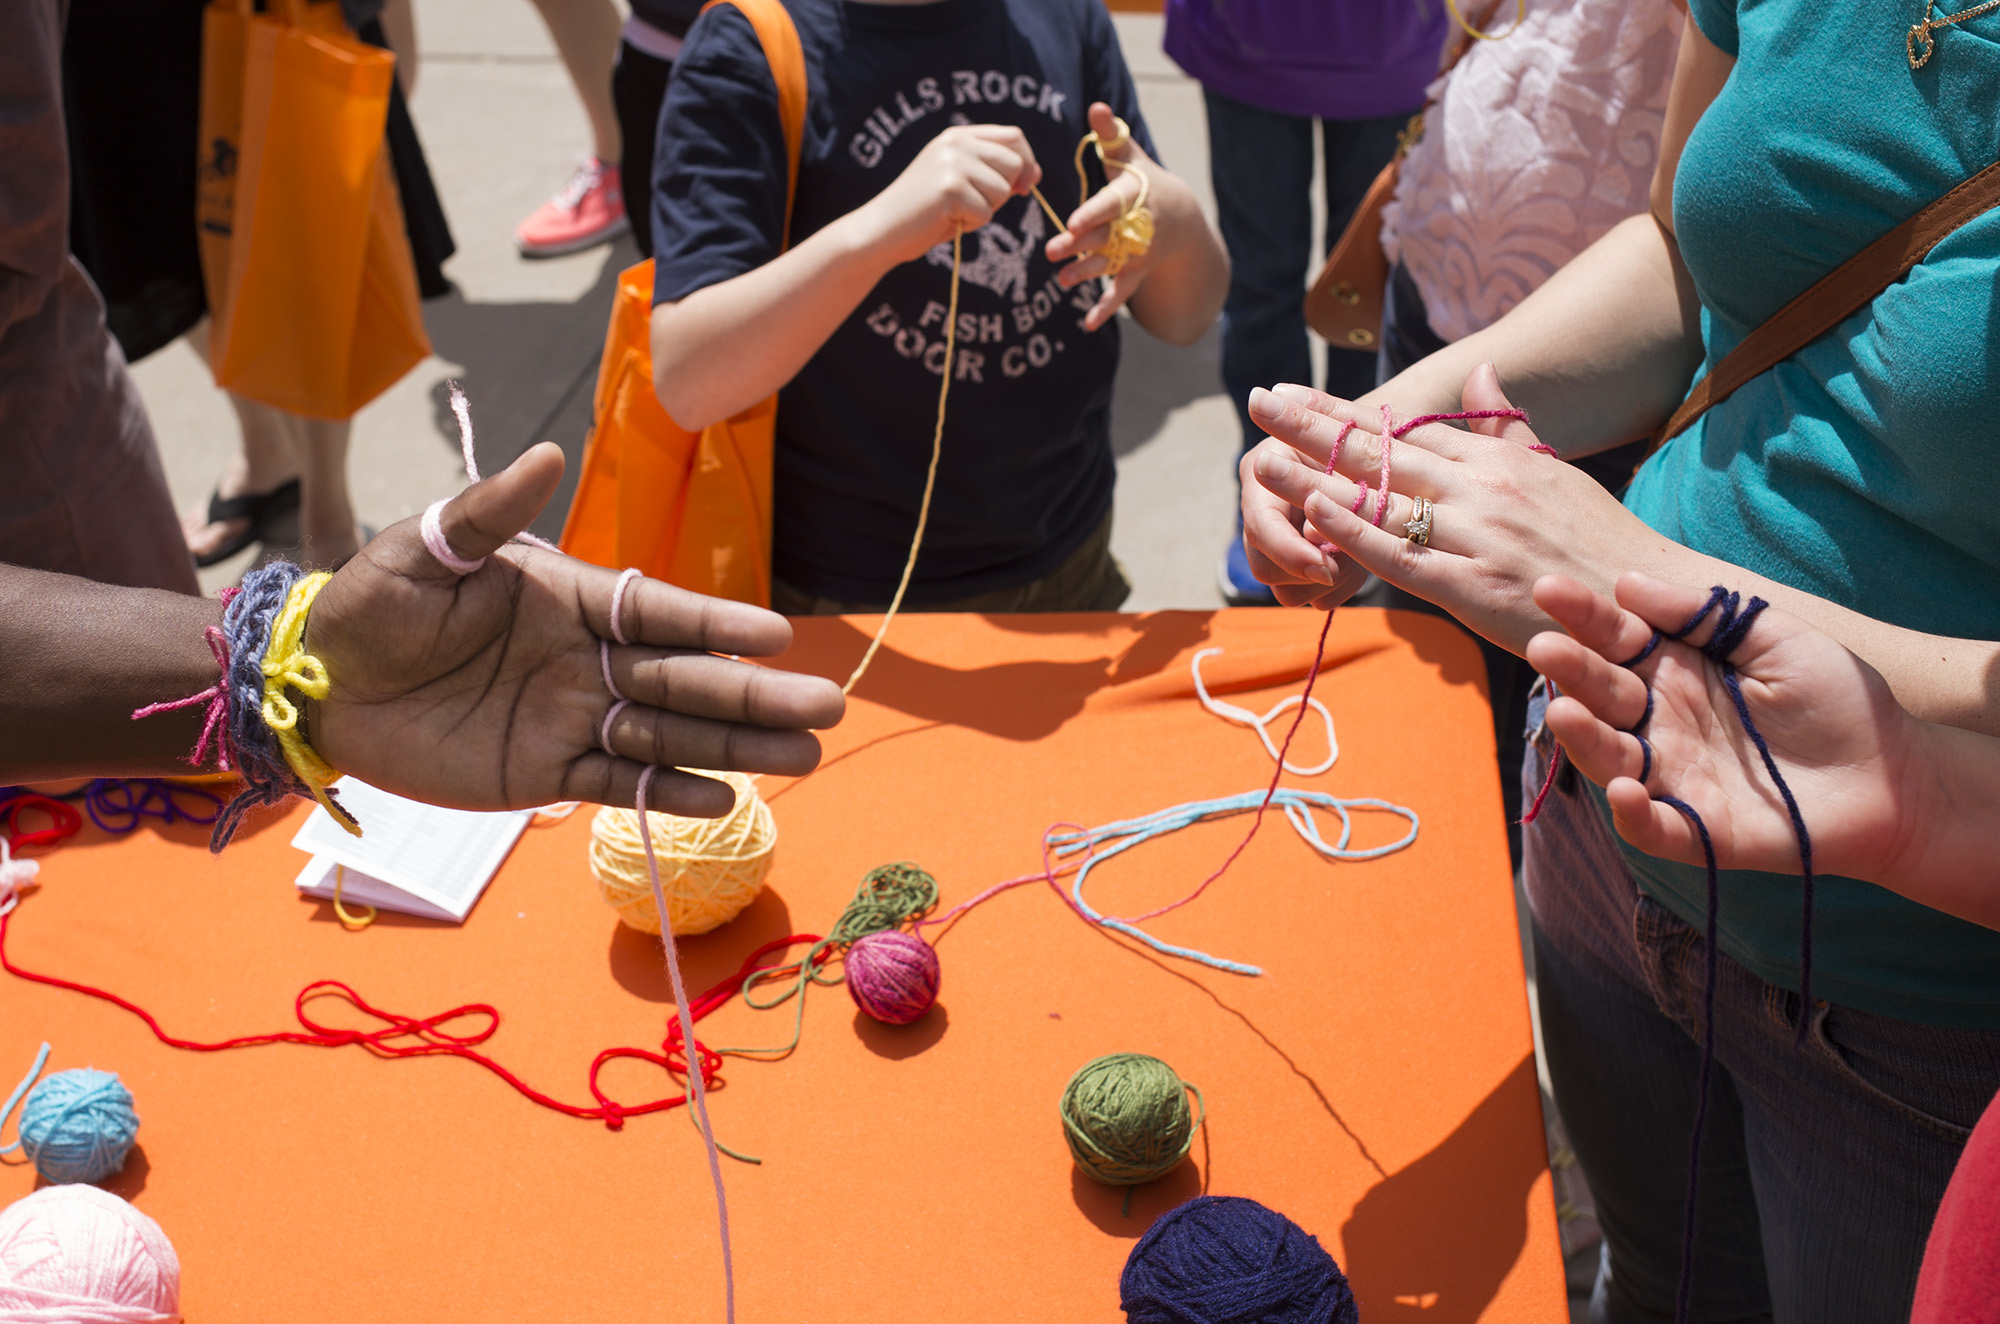 Hooks and Needles, RIT's knitting and crochet club, teaches visitors to make necklaces by hand during Imagine RIT: Innovation and Creativity Festival on the Rochester Institute of Technology campus in Rochester, N.Y., May 7, 2016. (Photo by Joey Ressler) #imaginerit #ritpj